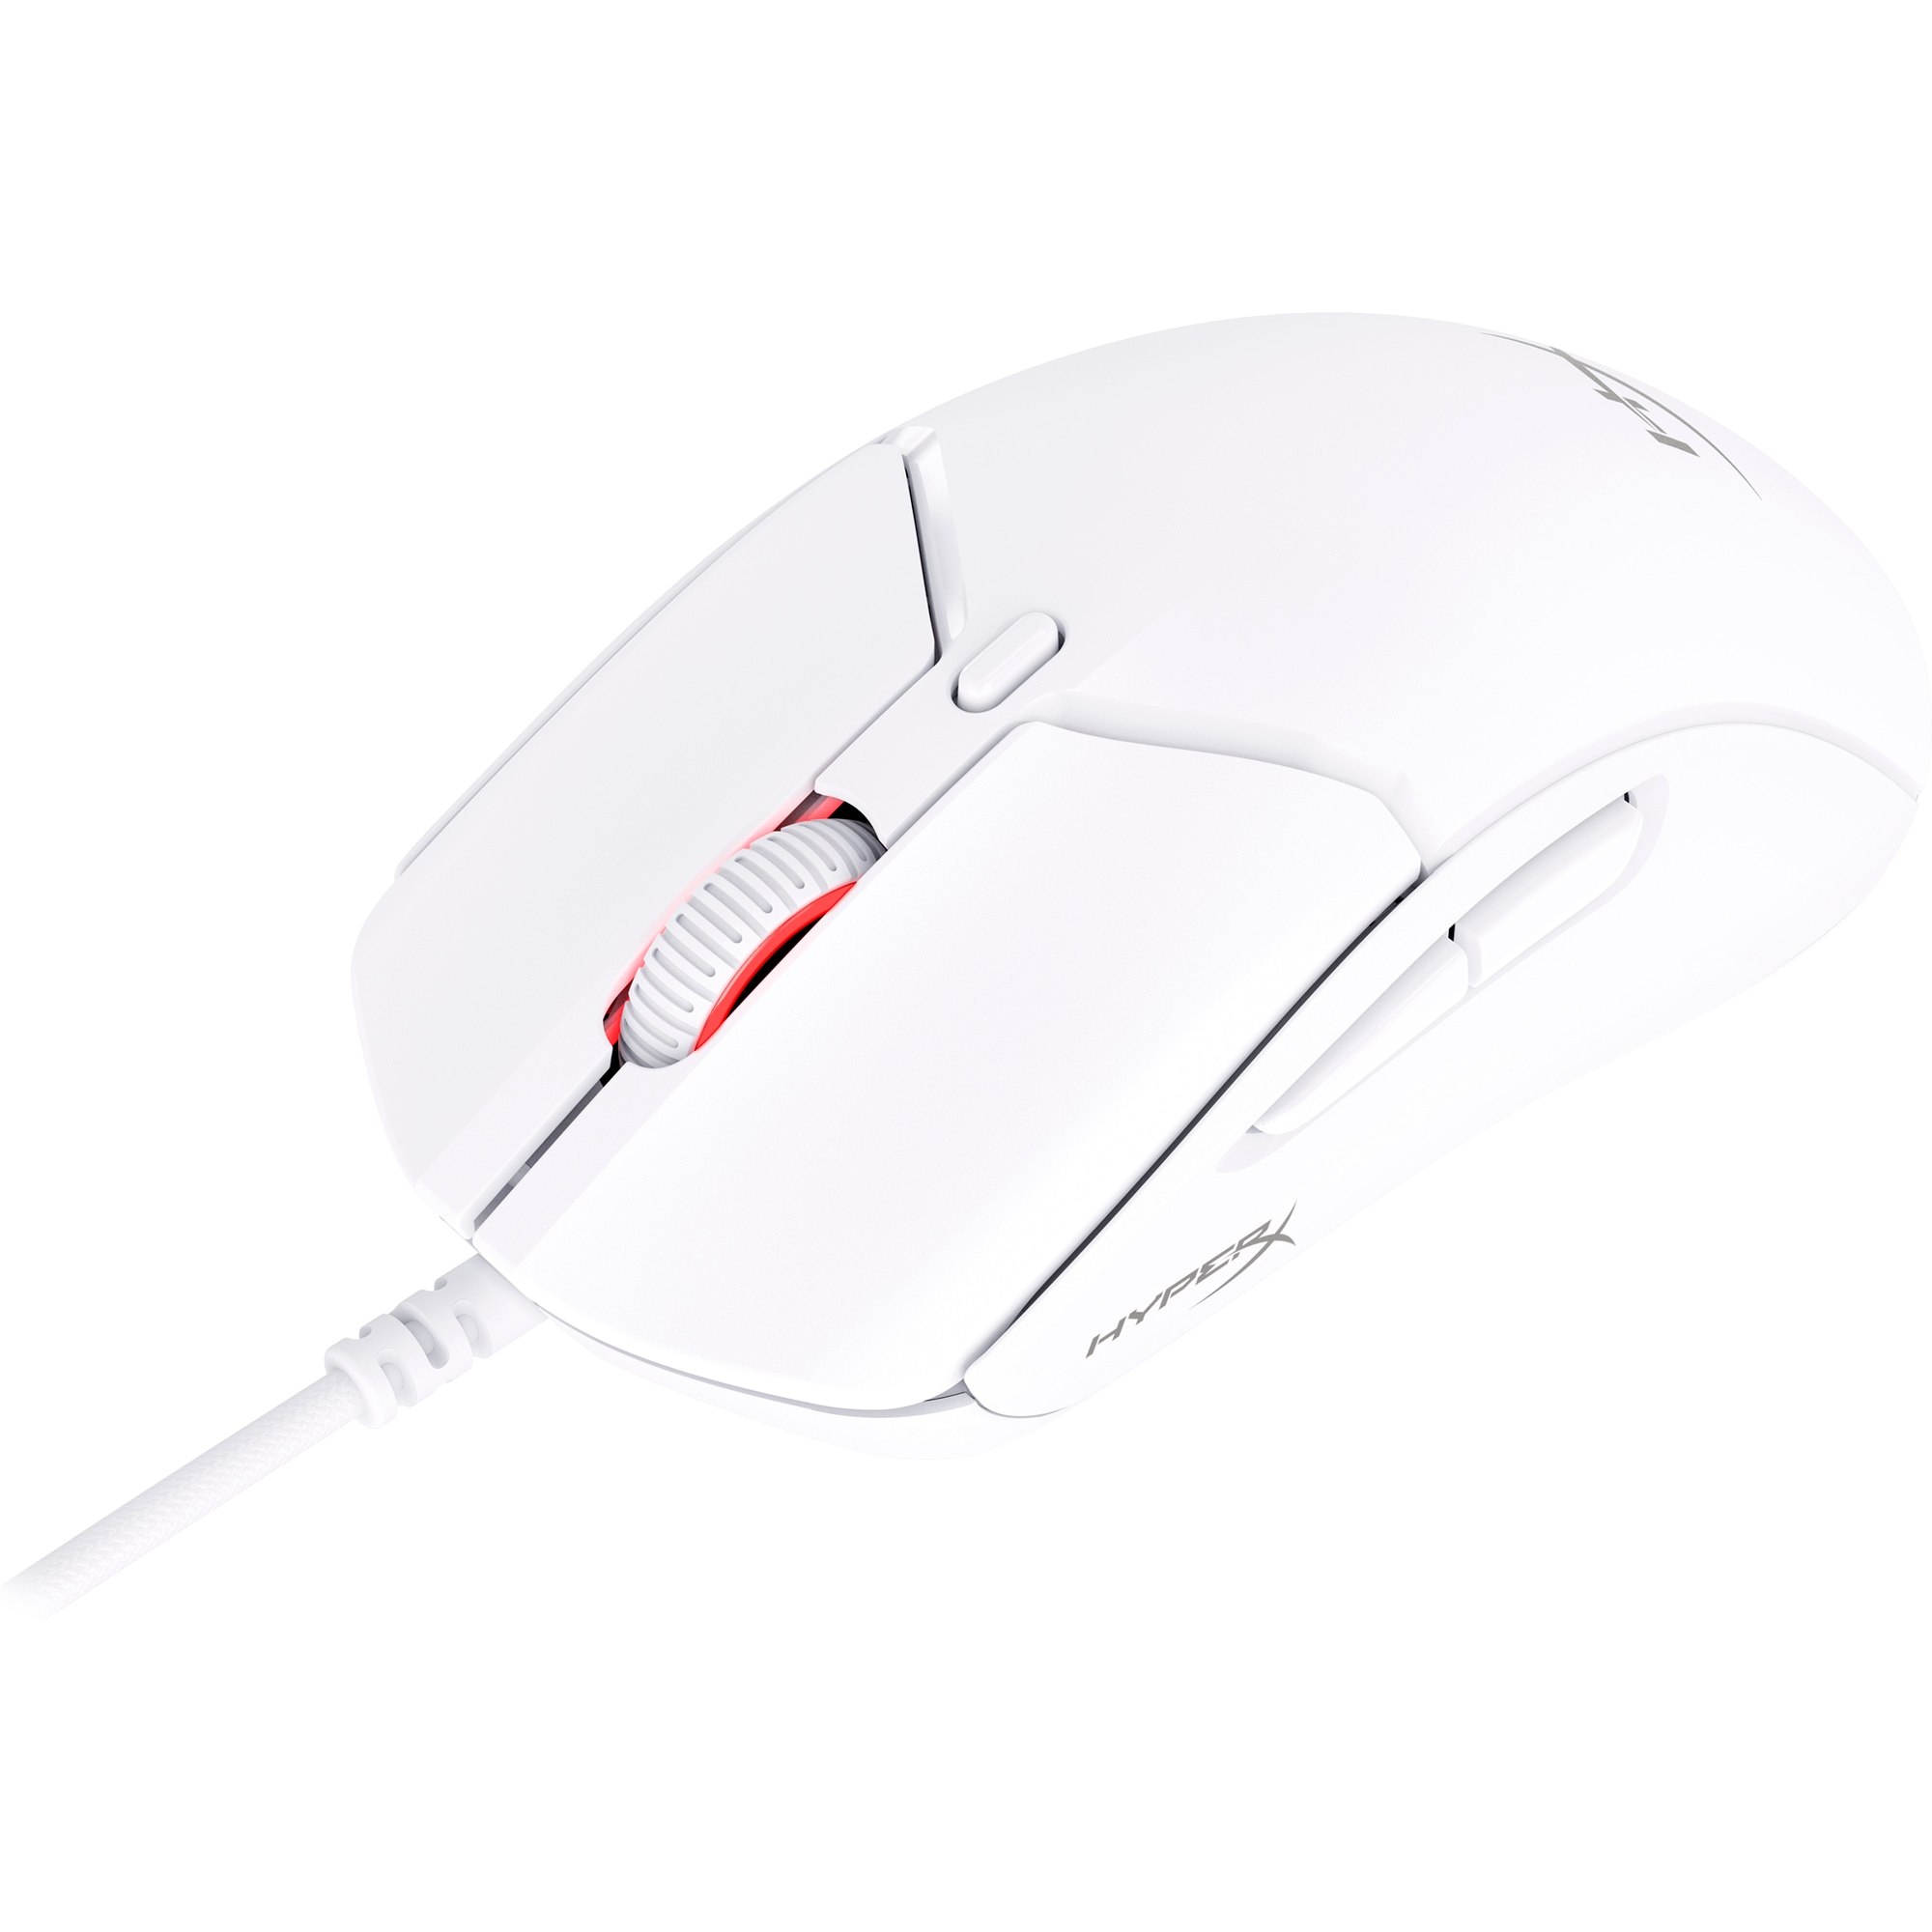 HyperX Pulsefire Haste White Wired Gaming Mouse 2 - Myš2 